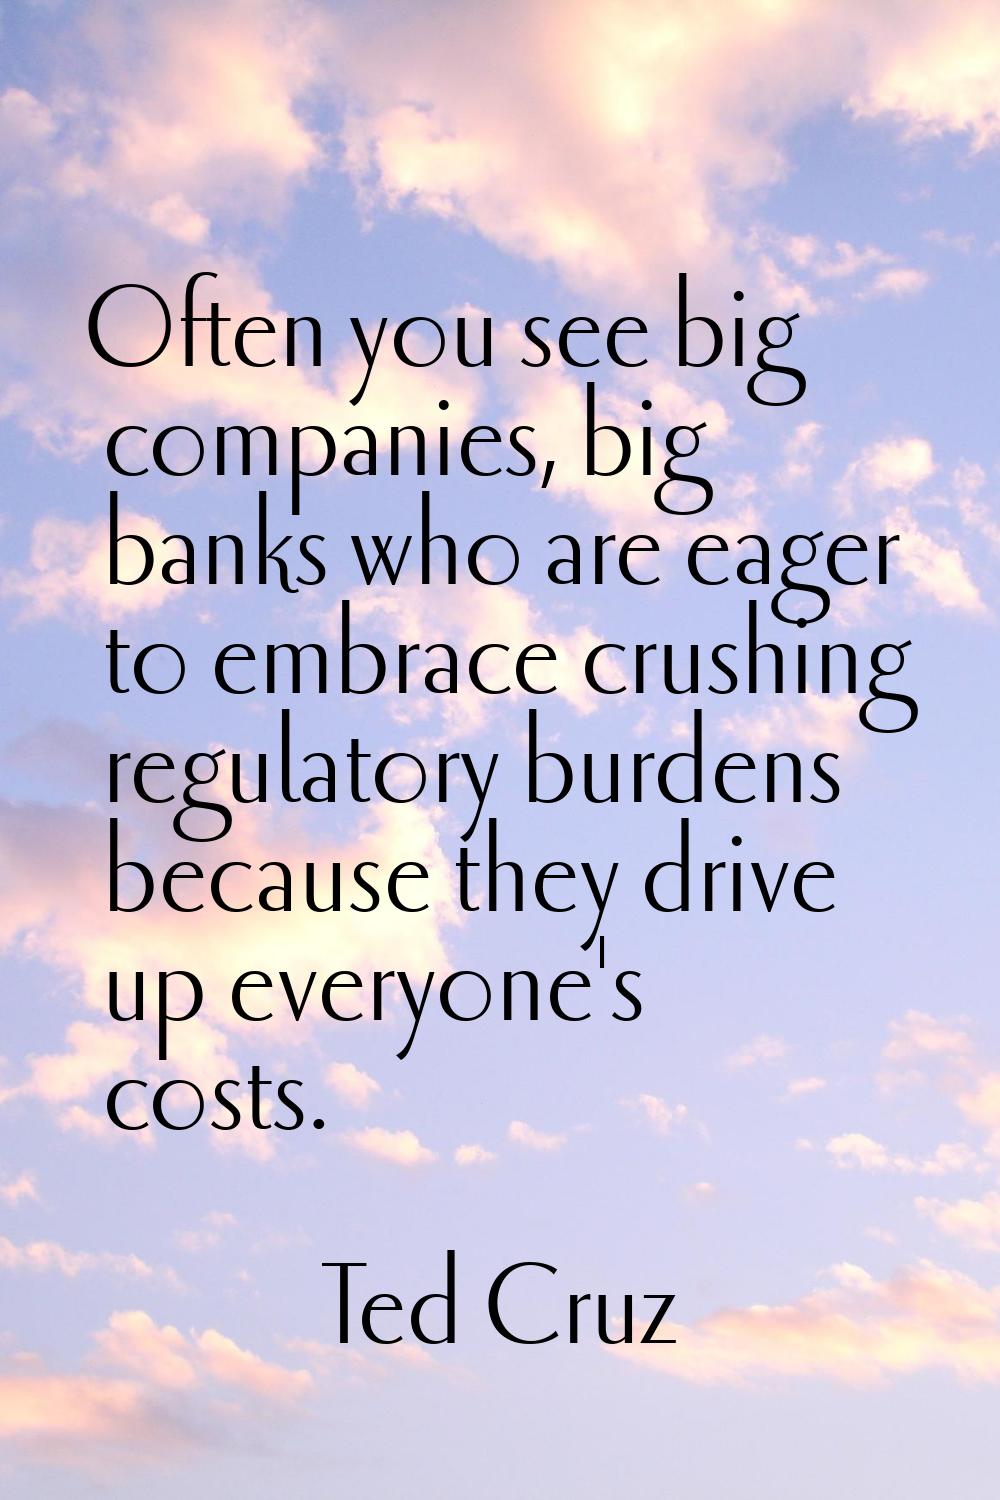 Often you see big companies, big banks who are eager to embrace crushing regulatory burdens because